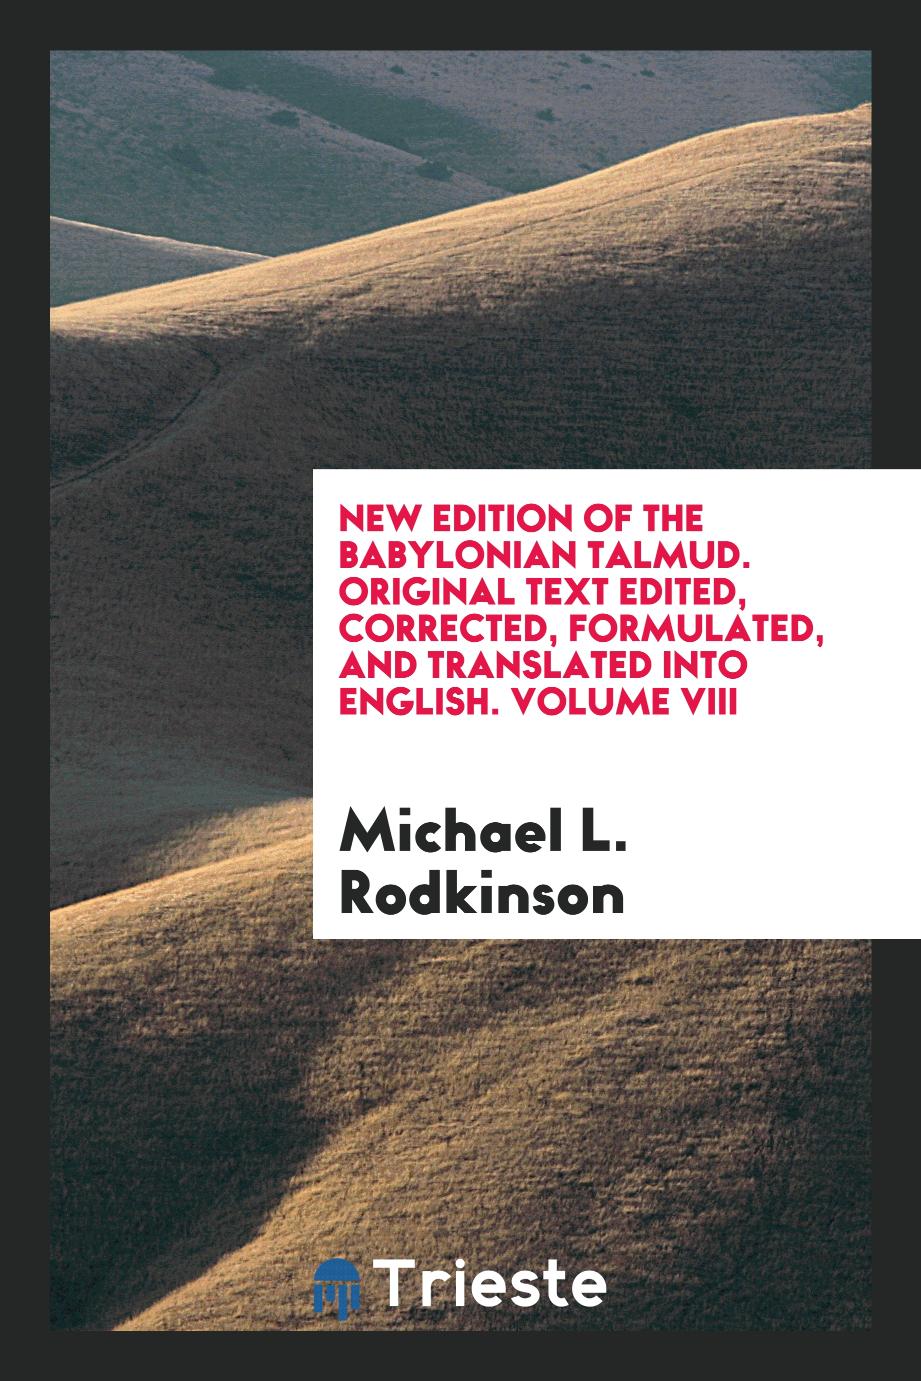 New edition of the Babylonian Talmud. Original text edited, corrected, formulated, and translated into English. Volume VIII